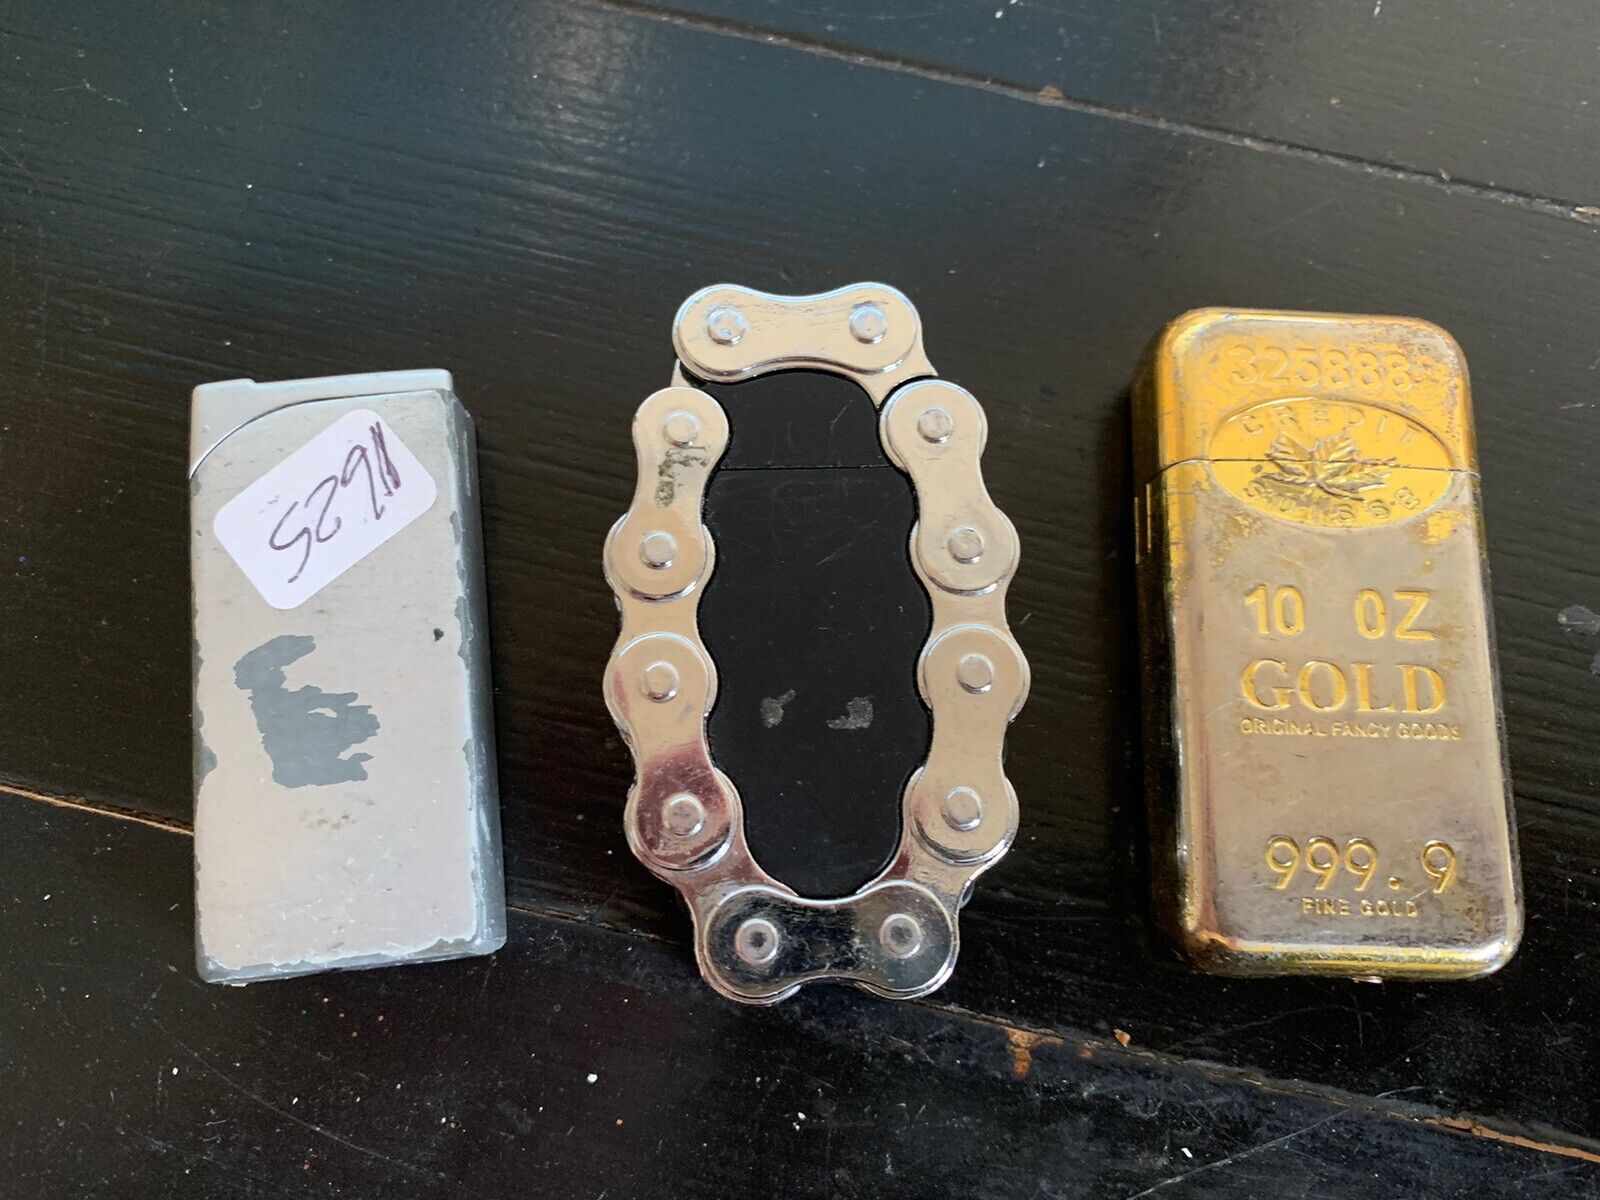 Gold Bar Replica Credit Suisse Lighter AND more READ